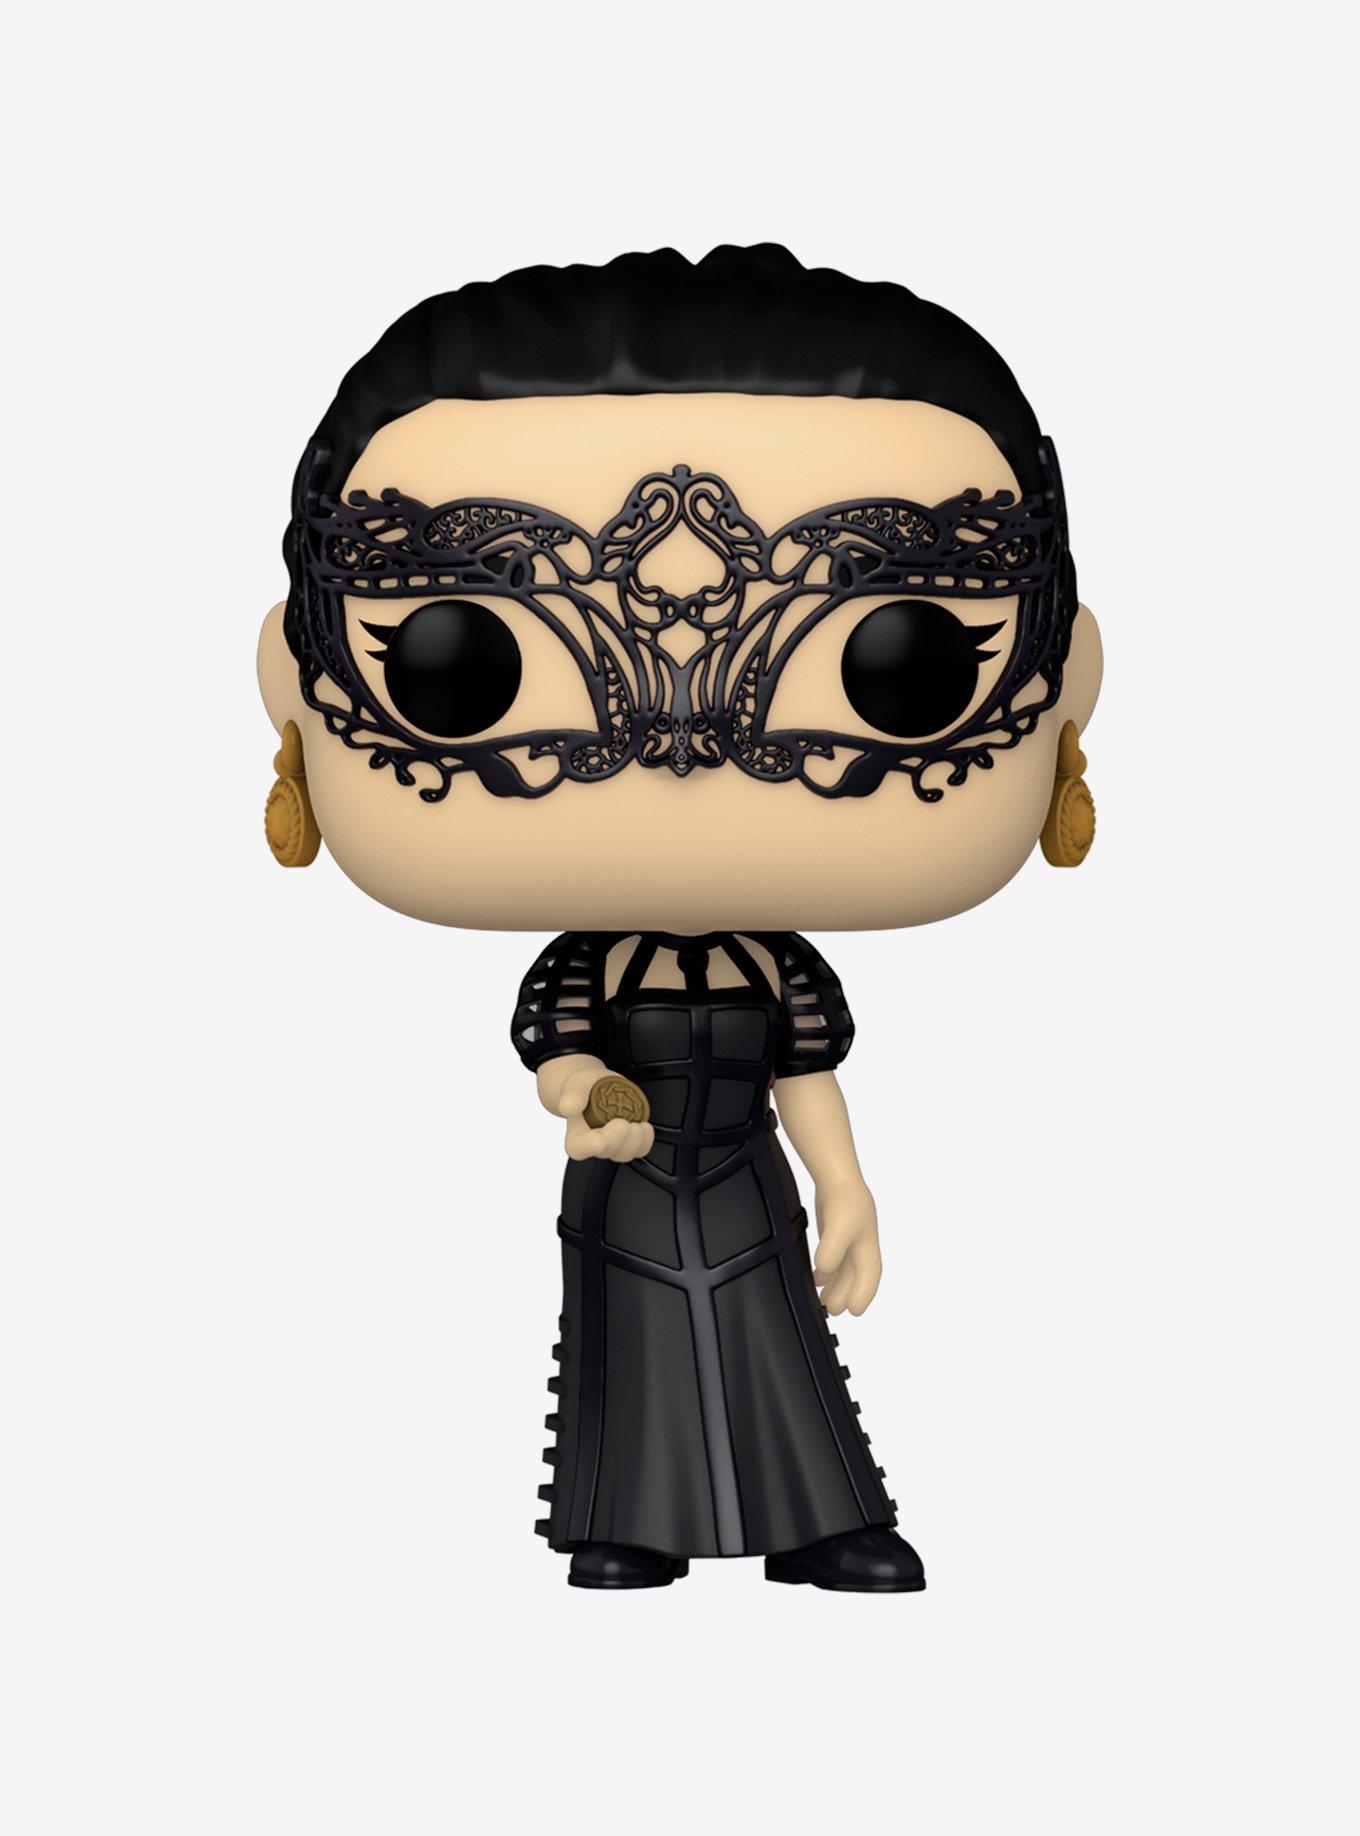 Funko Pop! Television The Witcher Yennefer Vinyl Figure - BoxLunch Exclusive